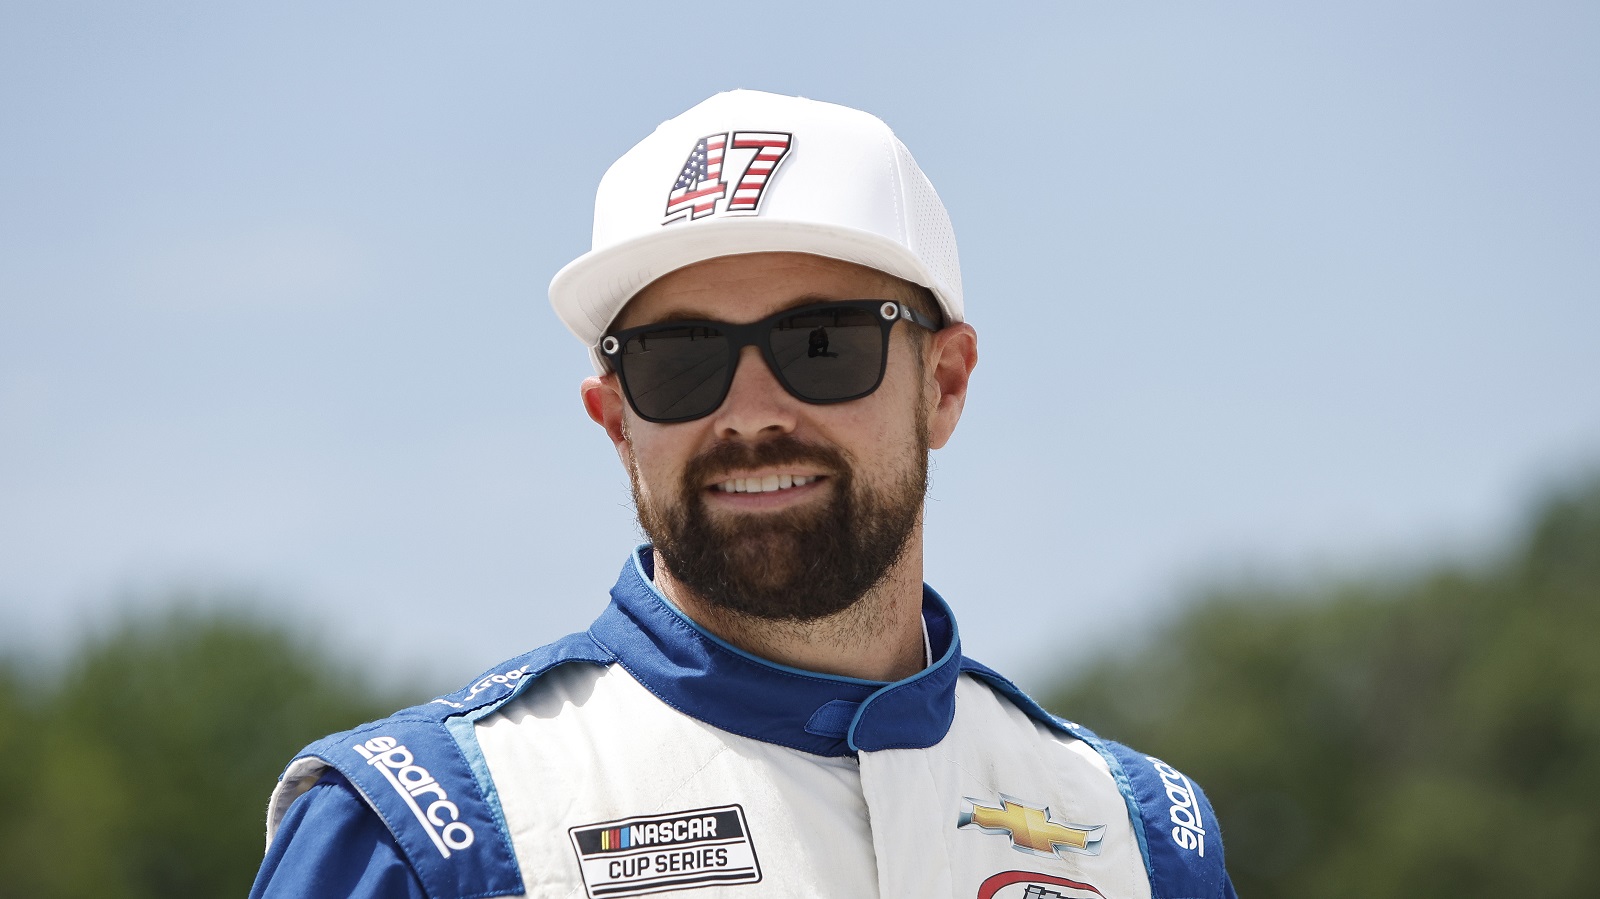 Ricky Stenhouse Jr. walks the grid prior to the NASCAR Cup Series Kwik Trip 250 at Road America on July 3, 2022 in Elkhart Lake, Wisconsin. | Sean Gardner/Getty Images